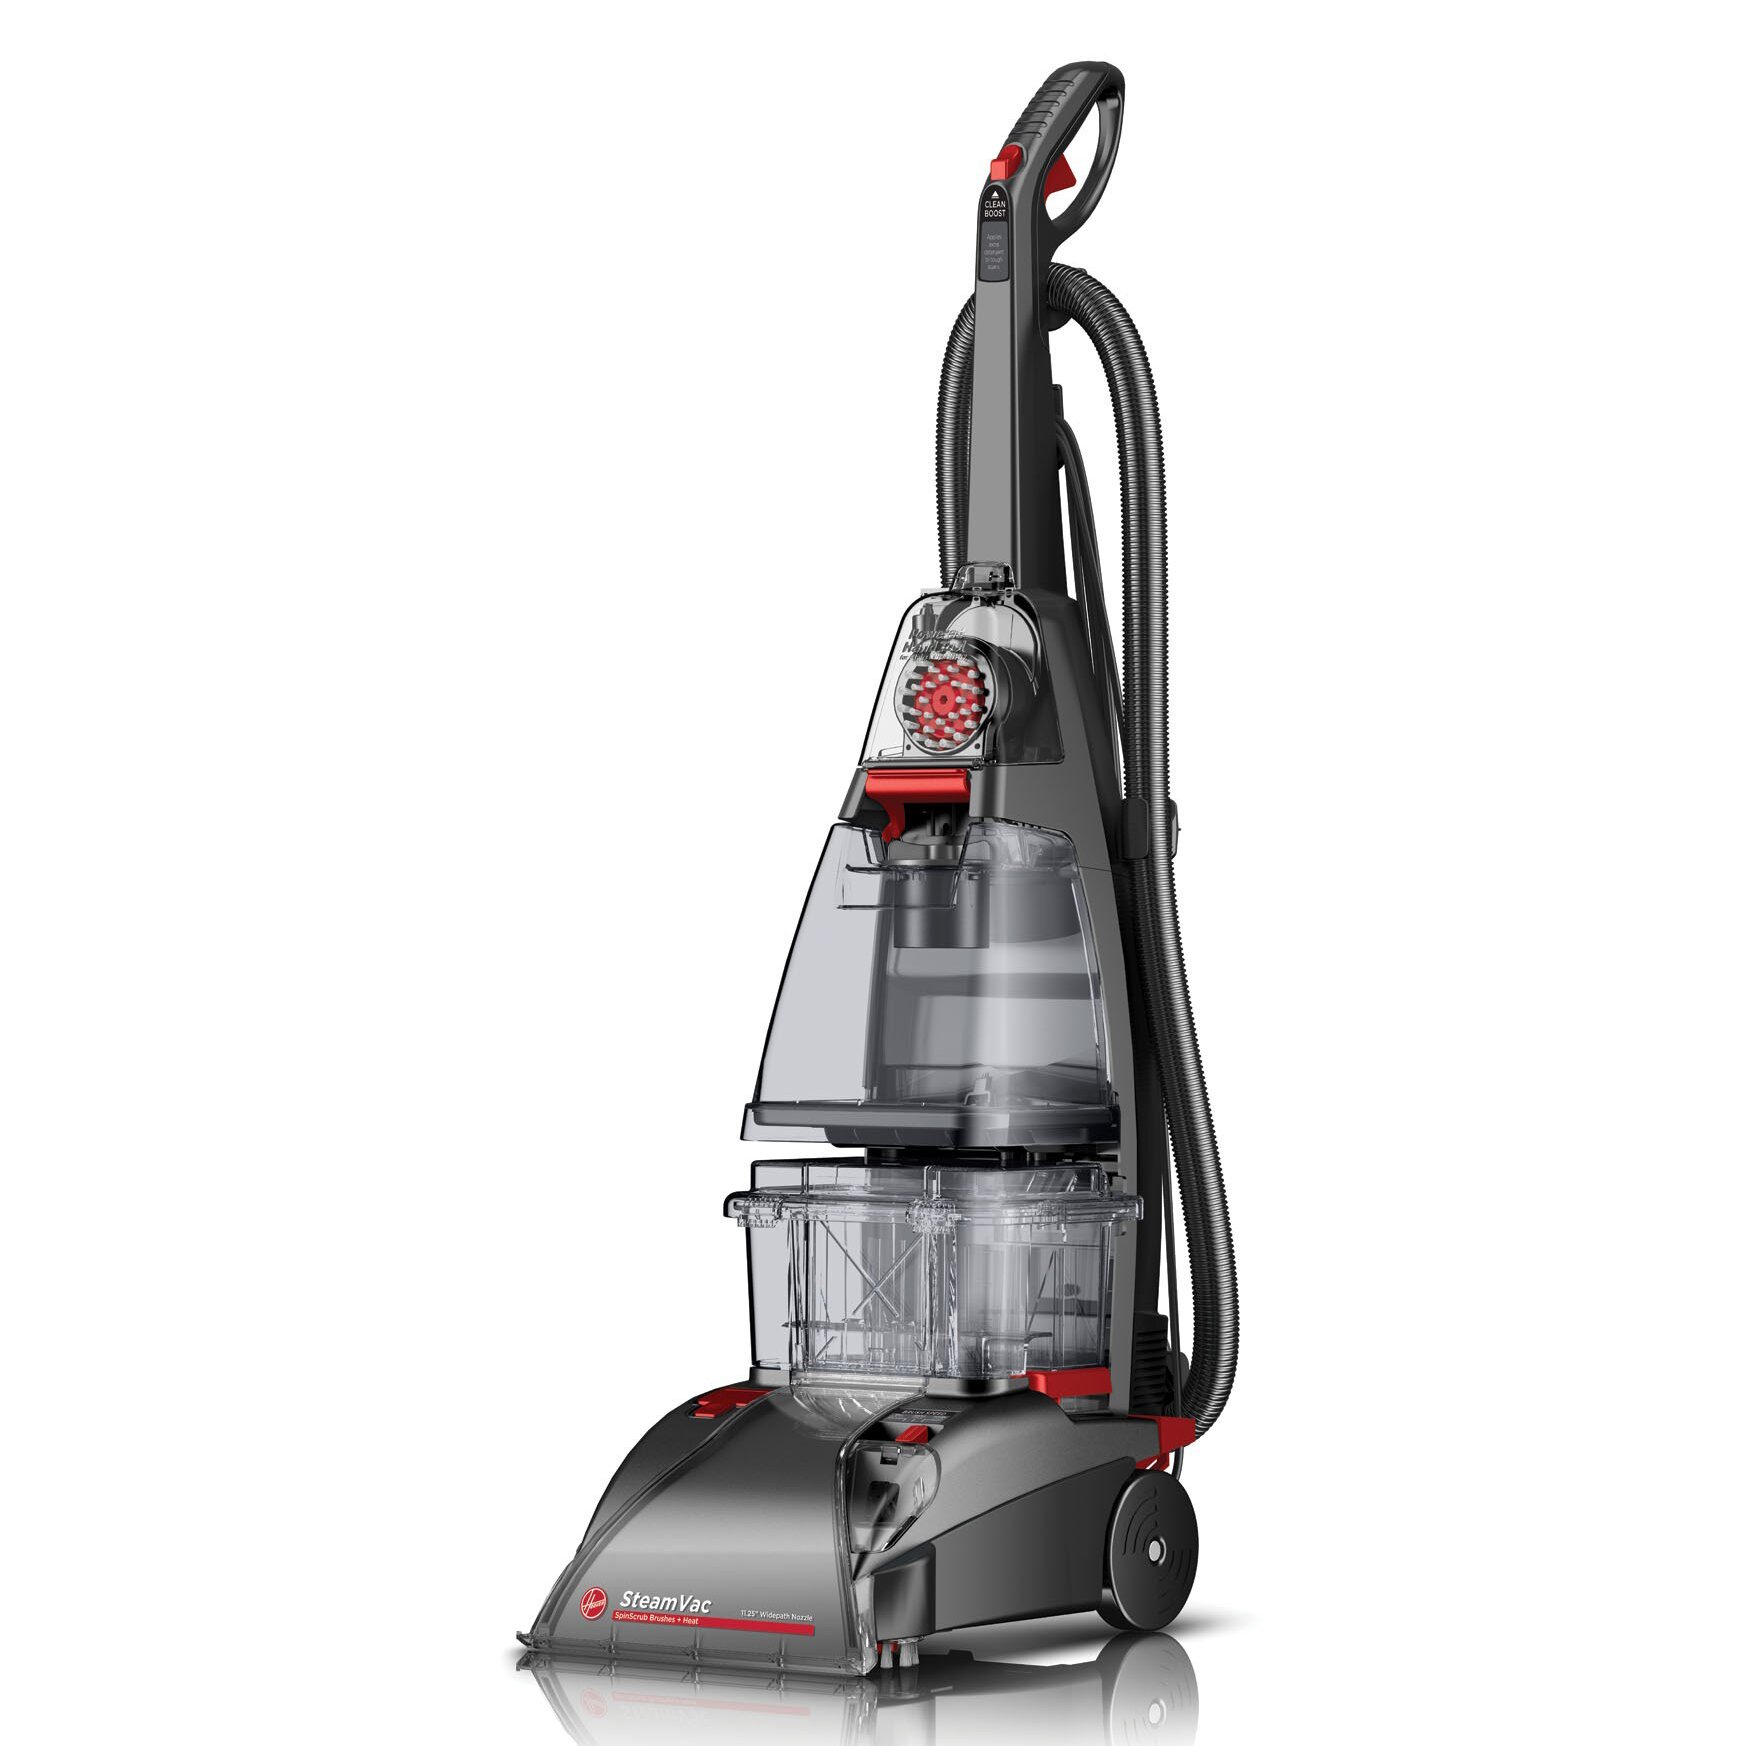 Hoover SteamVac Plus Carpet Cleaner with Clean Surge